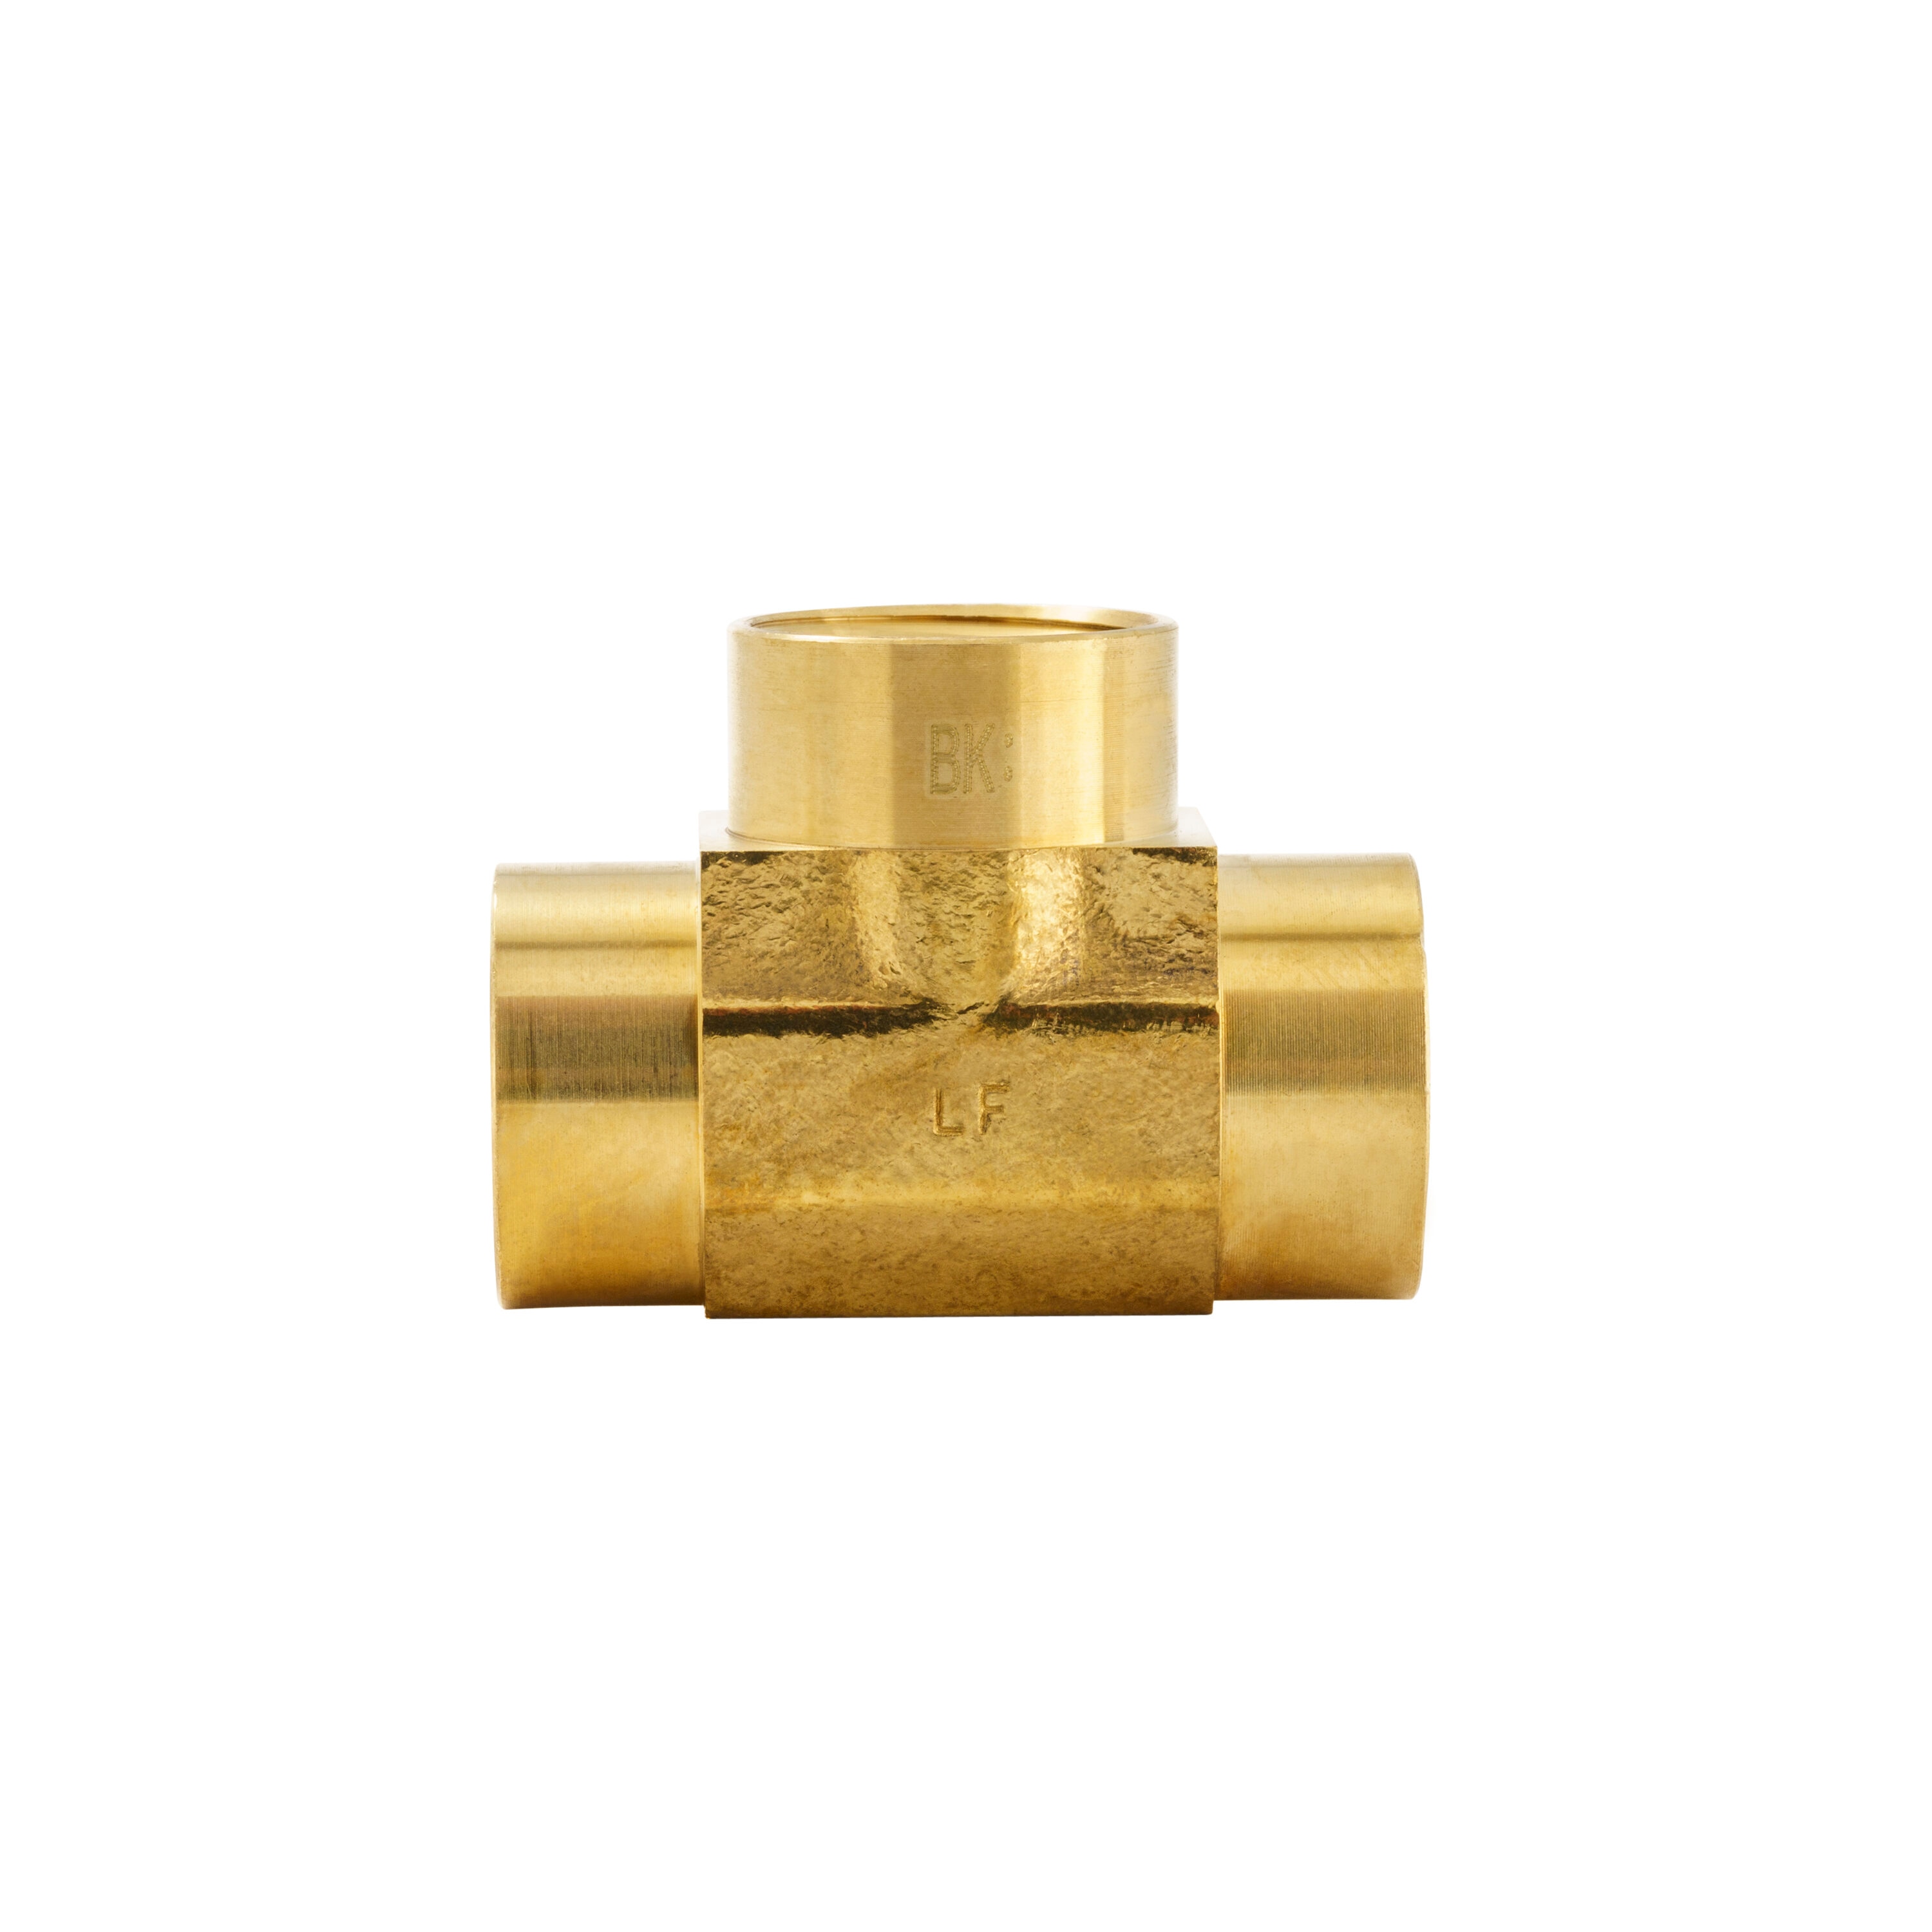 Proline Series 1/2-in x 1/2-in Threaded Tee Fitting in the Brass